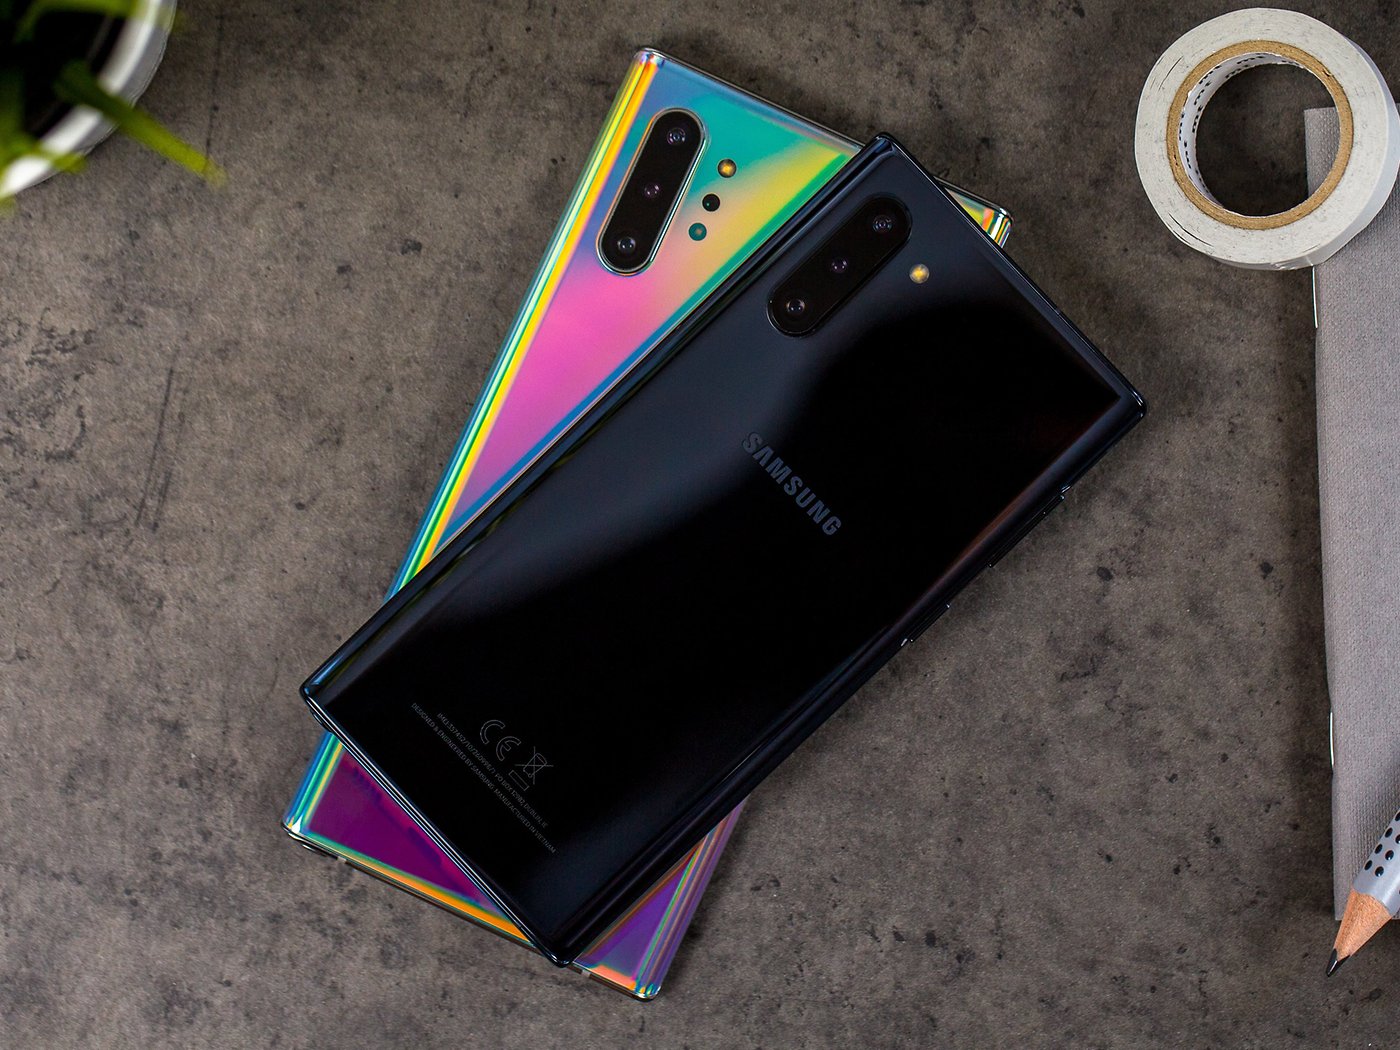 Samsung Galaxy Note 10 review: an enchanting smartphone for phablet fans